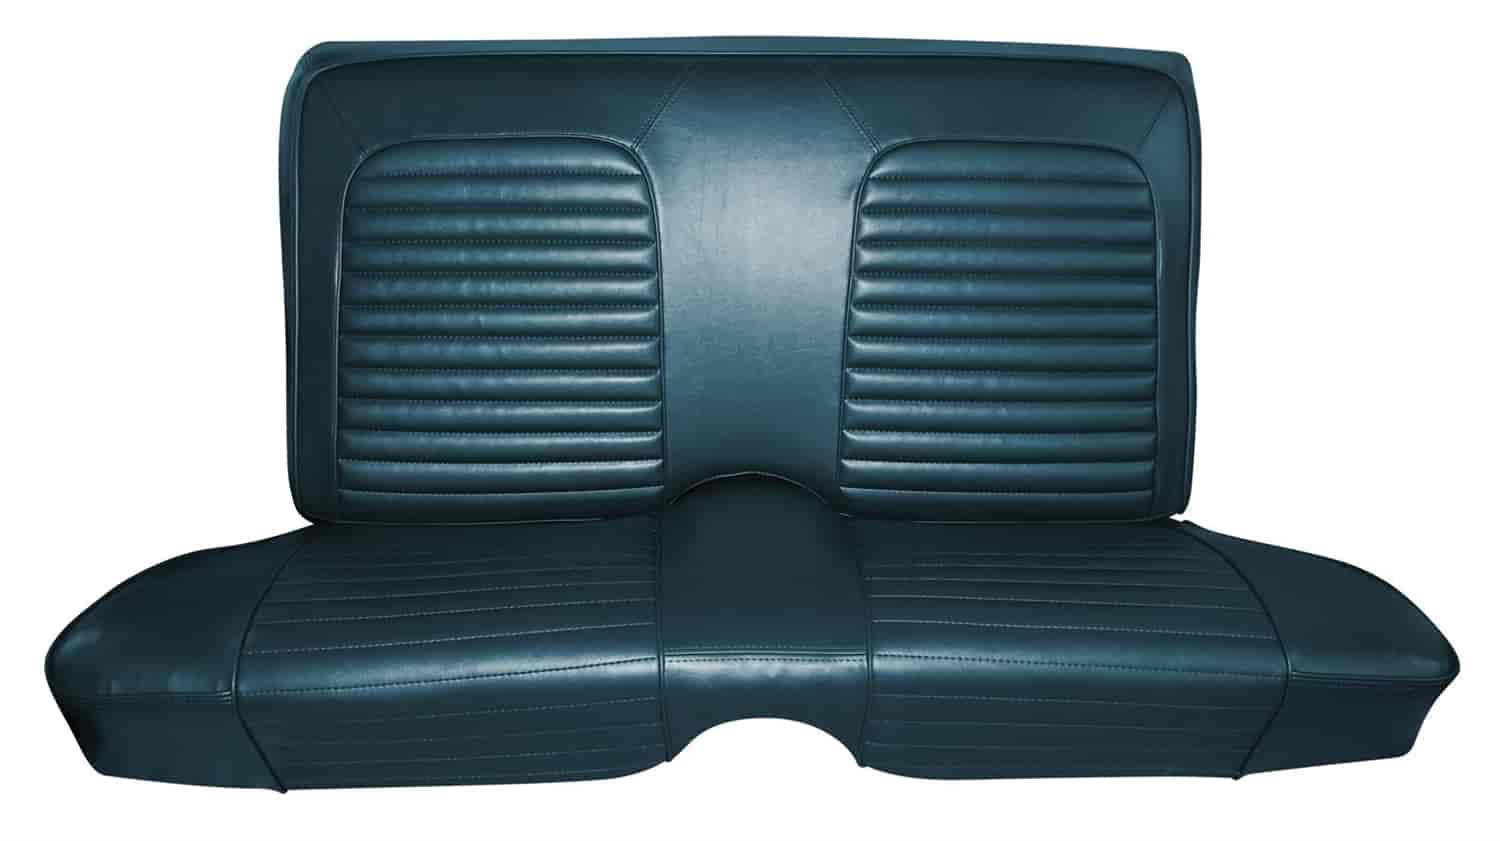 1964 Ford Falcon Futura Convertible Interior Front and Rear Bench Seat Upholstery Set